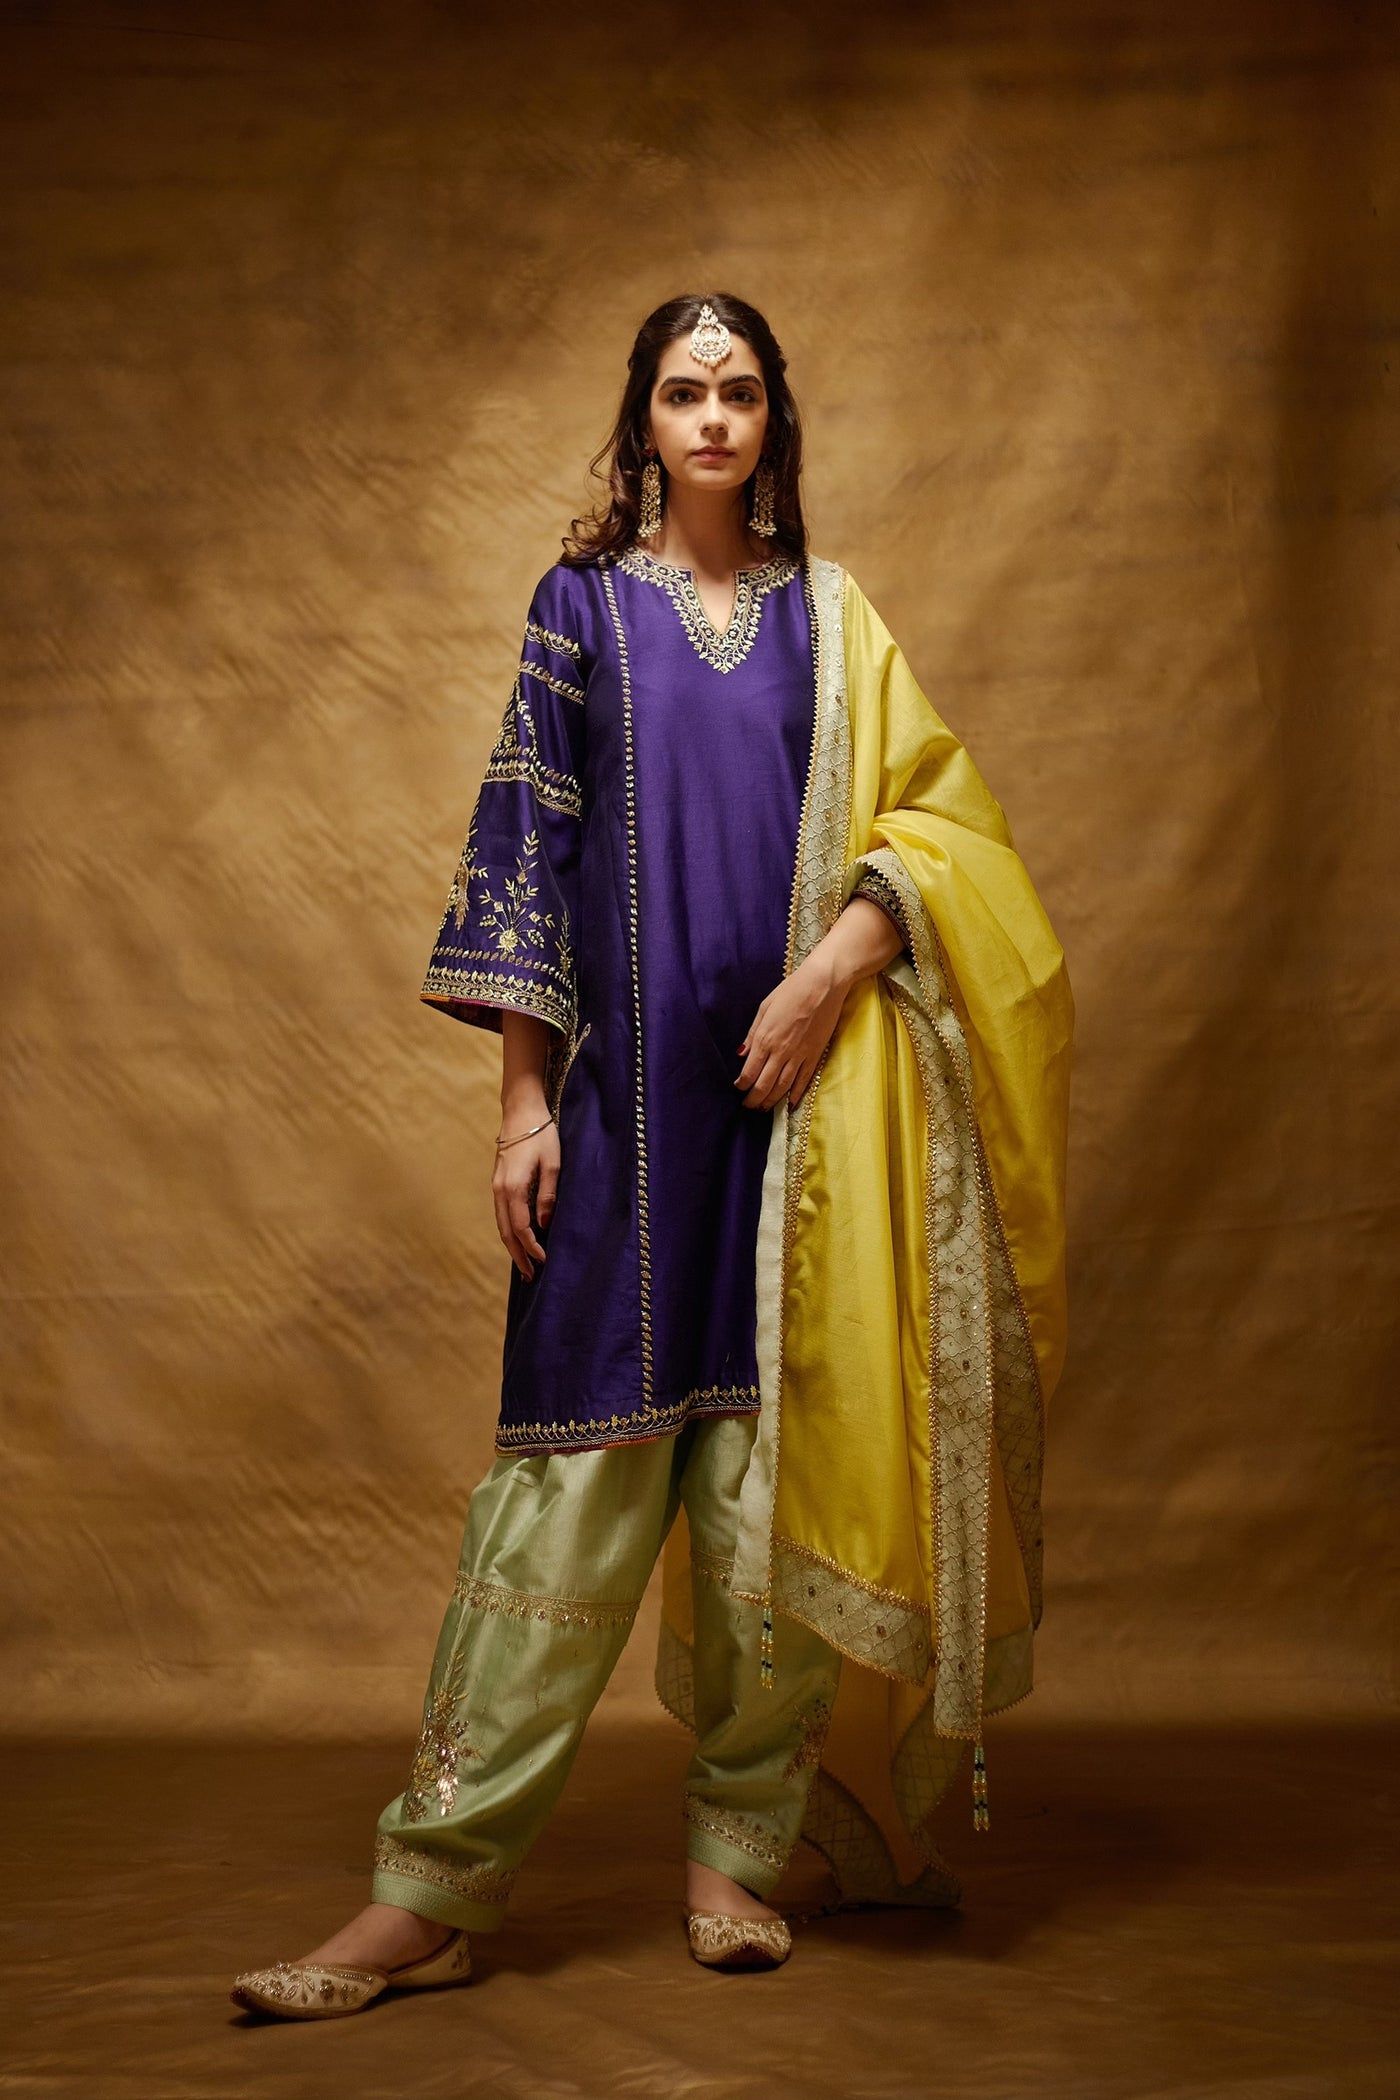 Timeless Trends: Salwar Kurta Designs That Stand the Test of Time